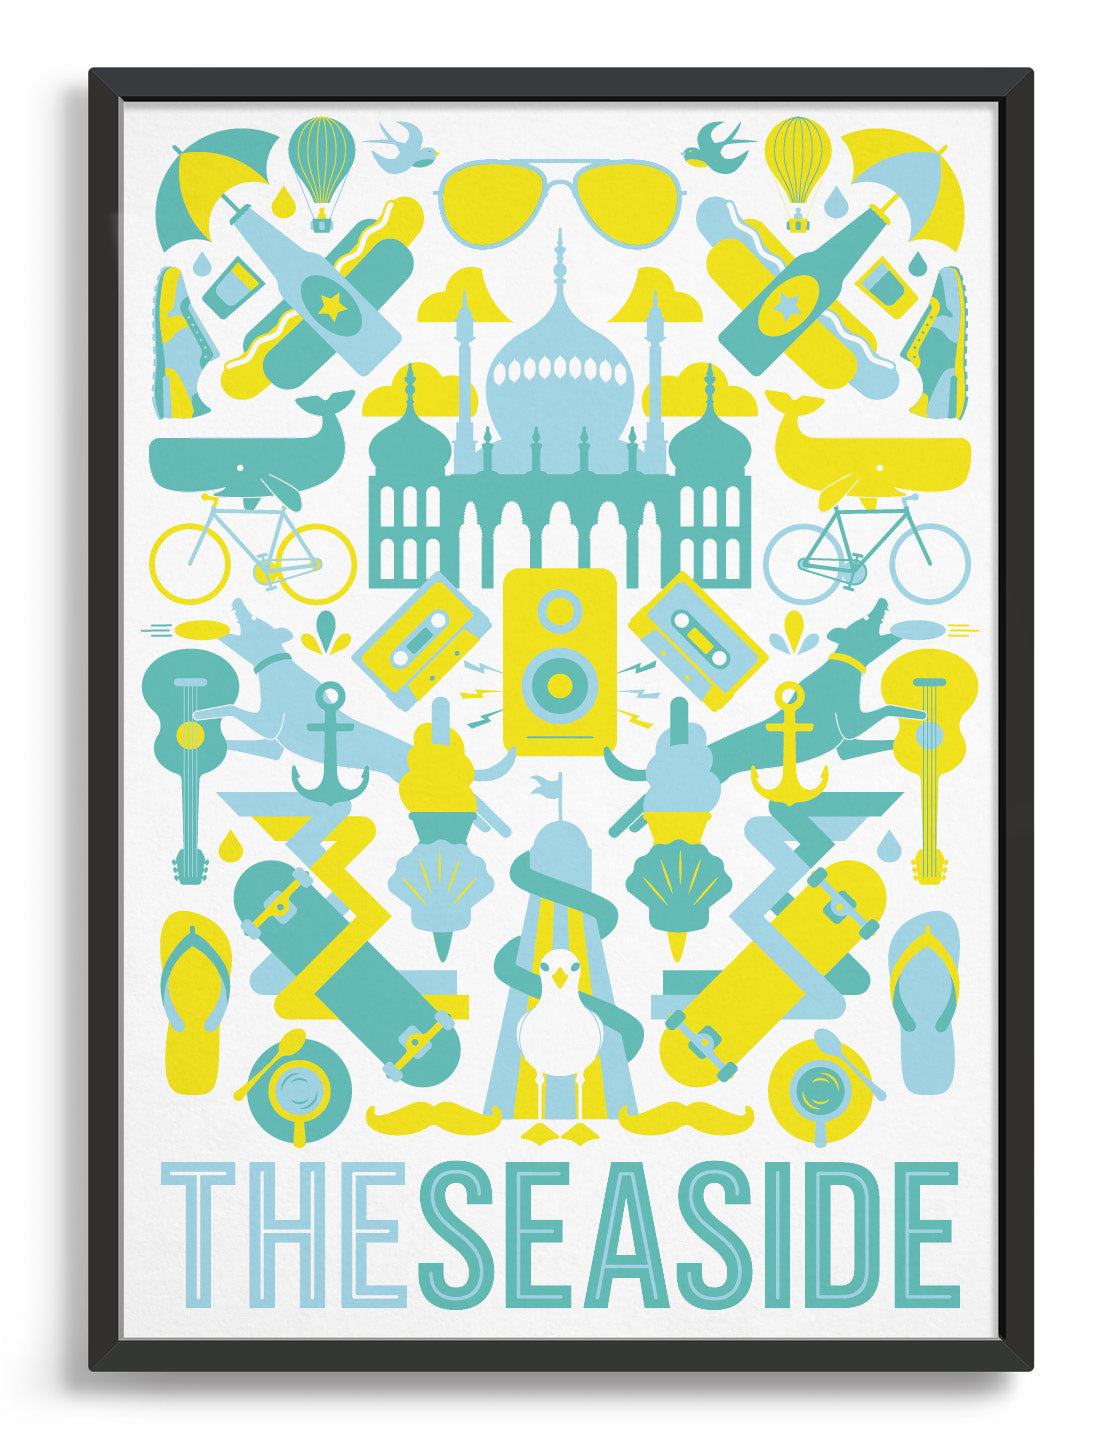 framed 'The Seaside' souvenir art print of Brighton iconography including the Royal Pavilion 